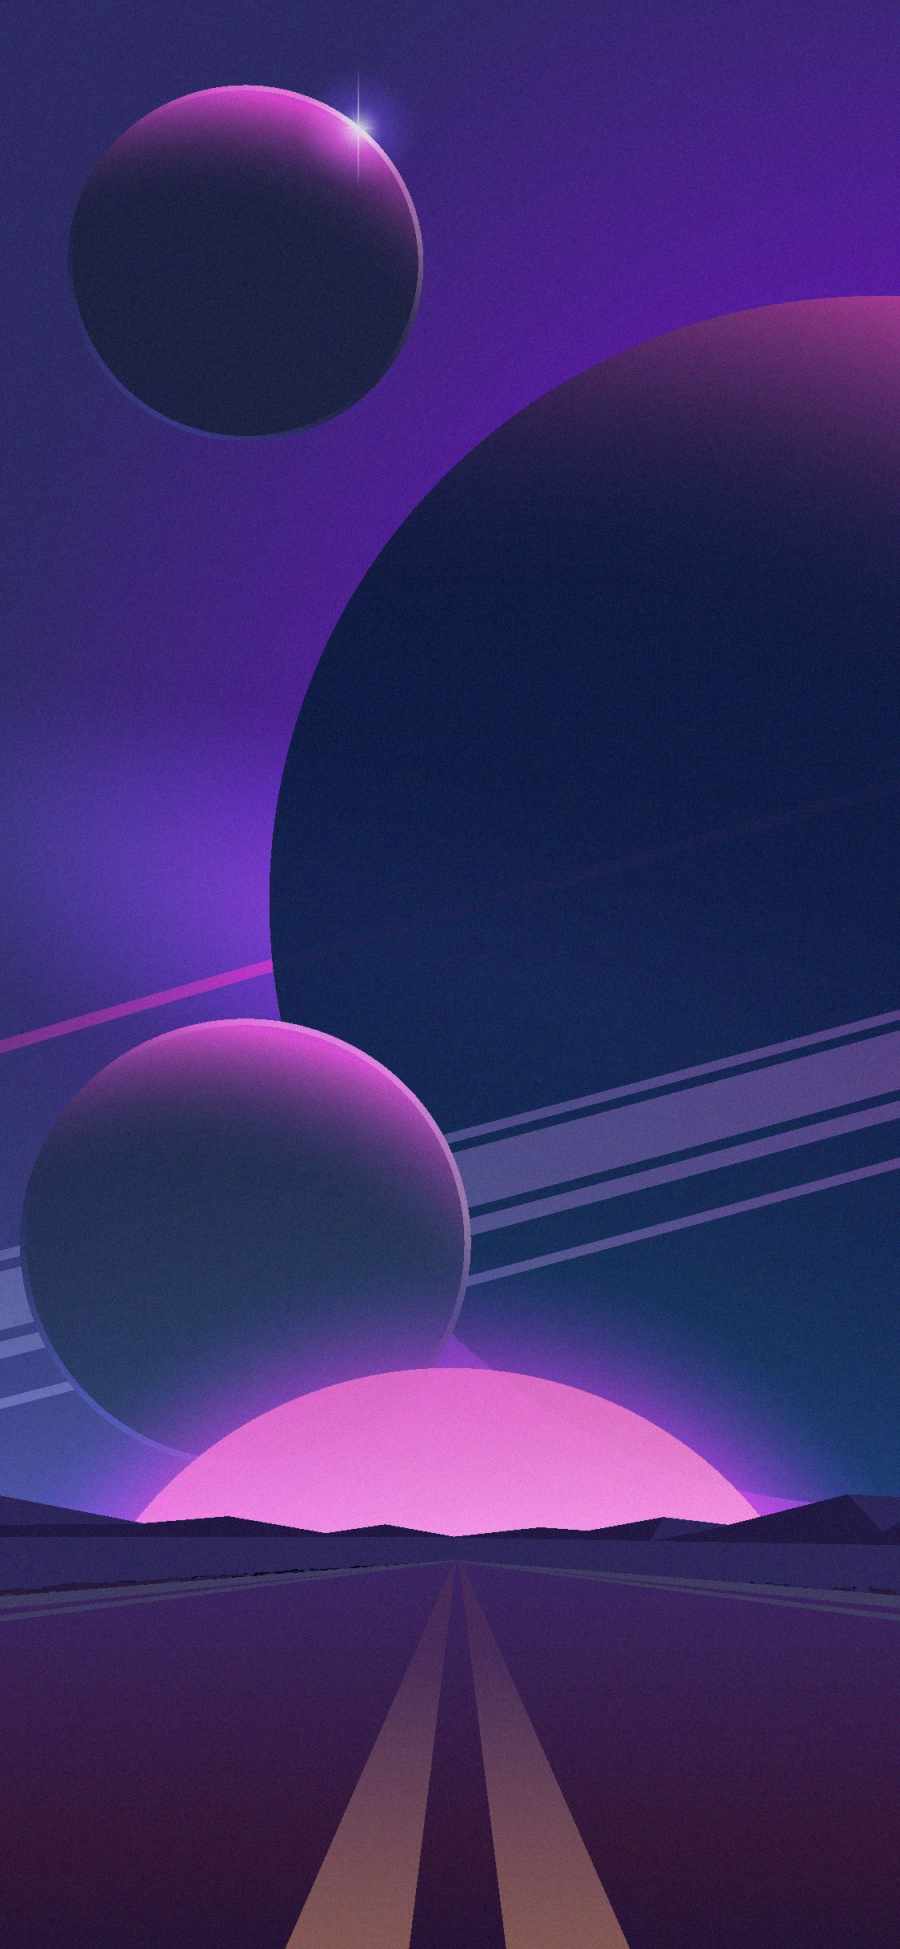 Road to Space Minimalism iPhone Wallpaper